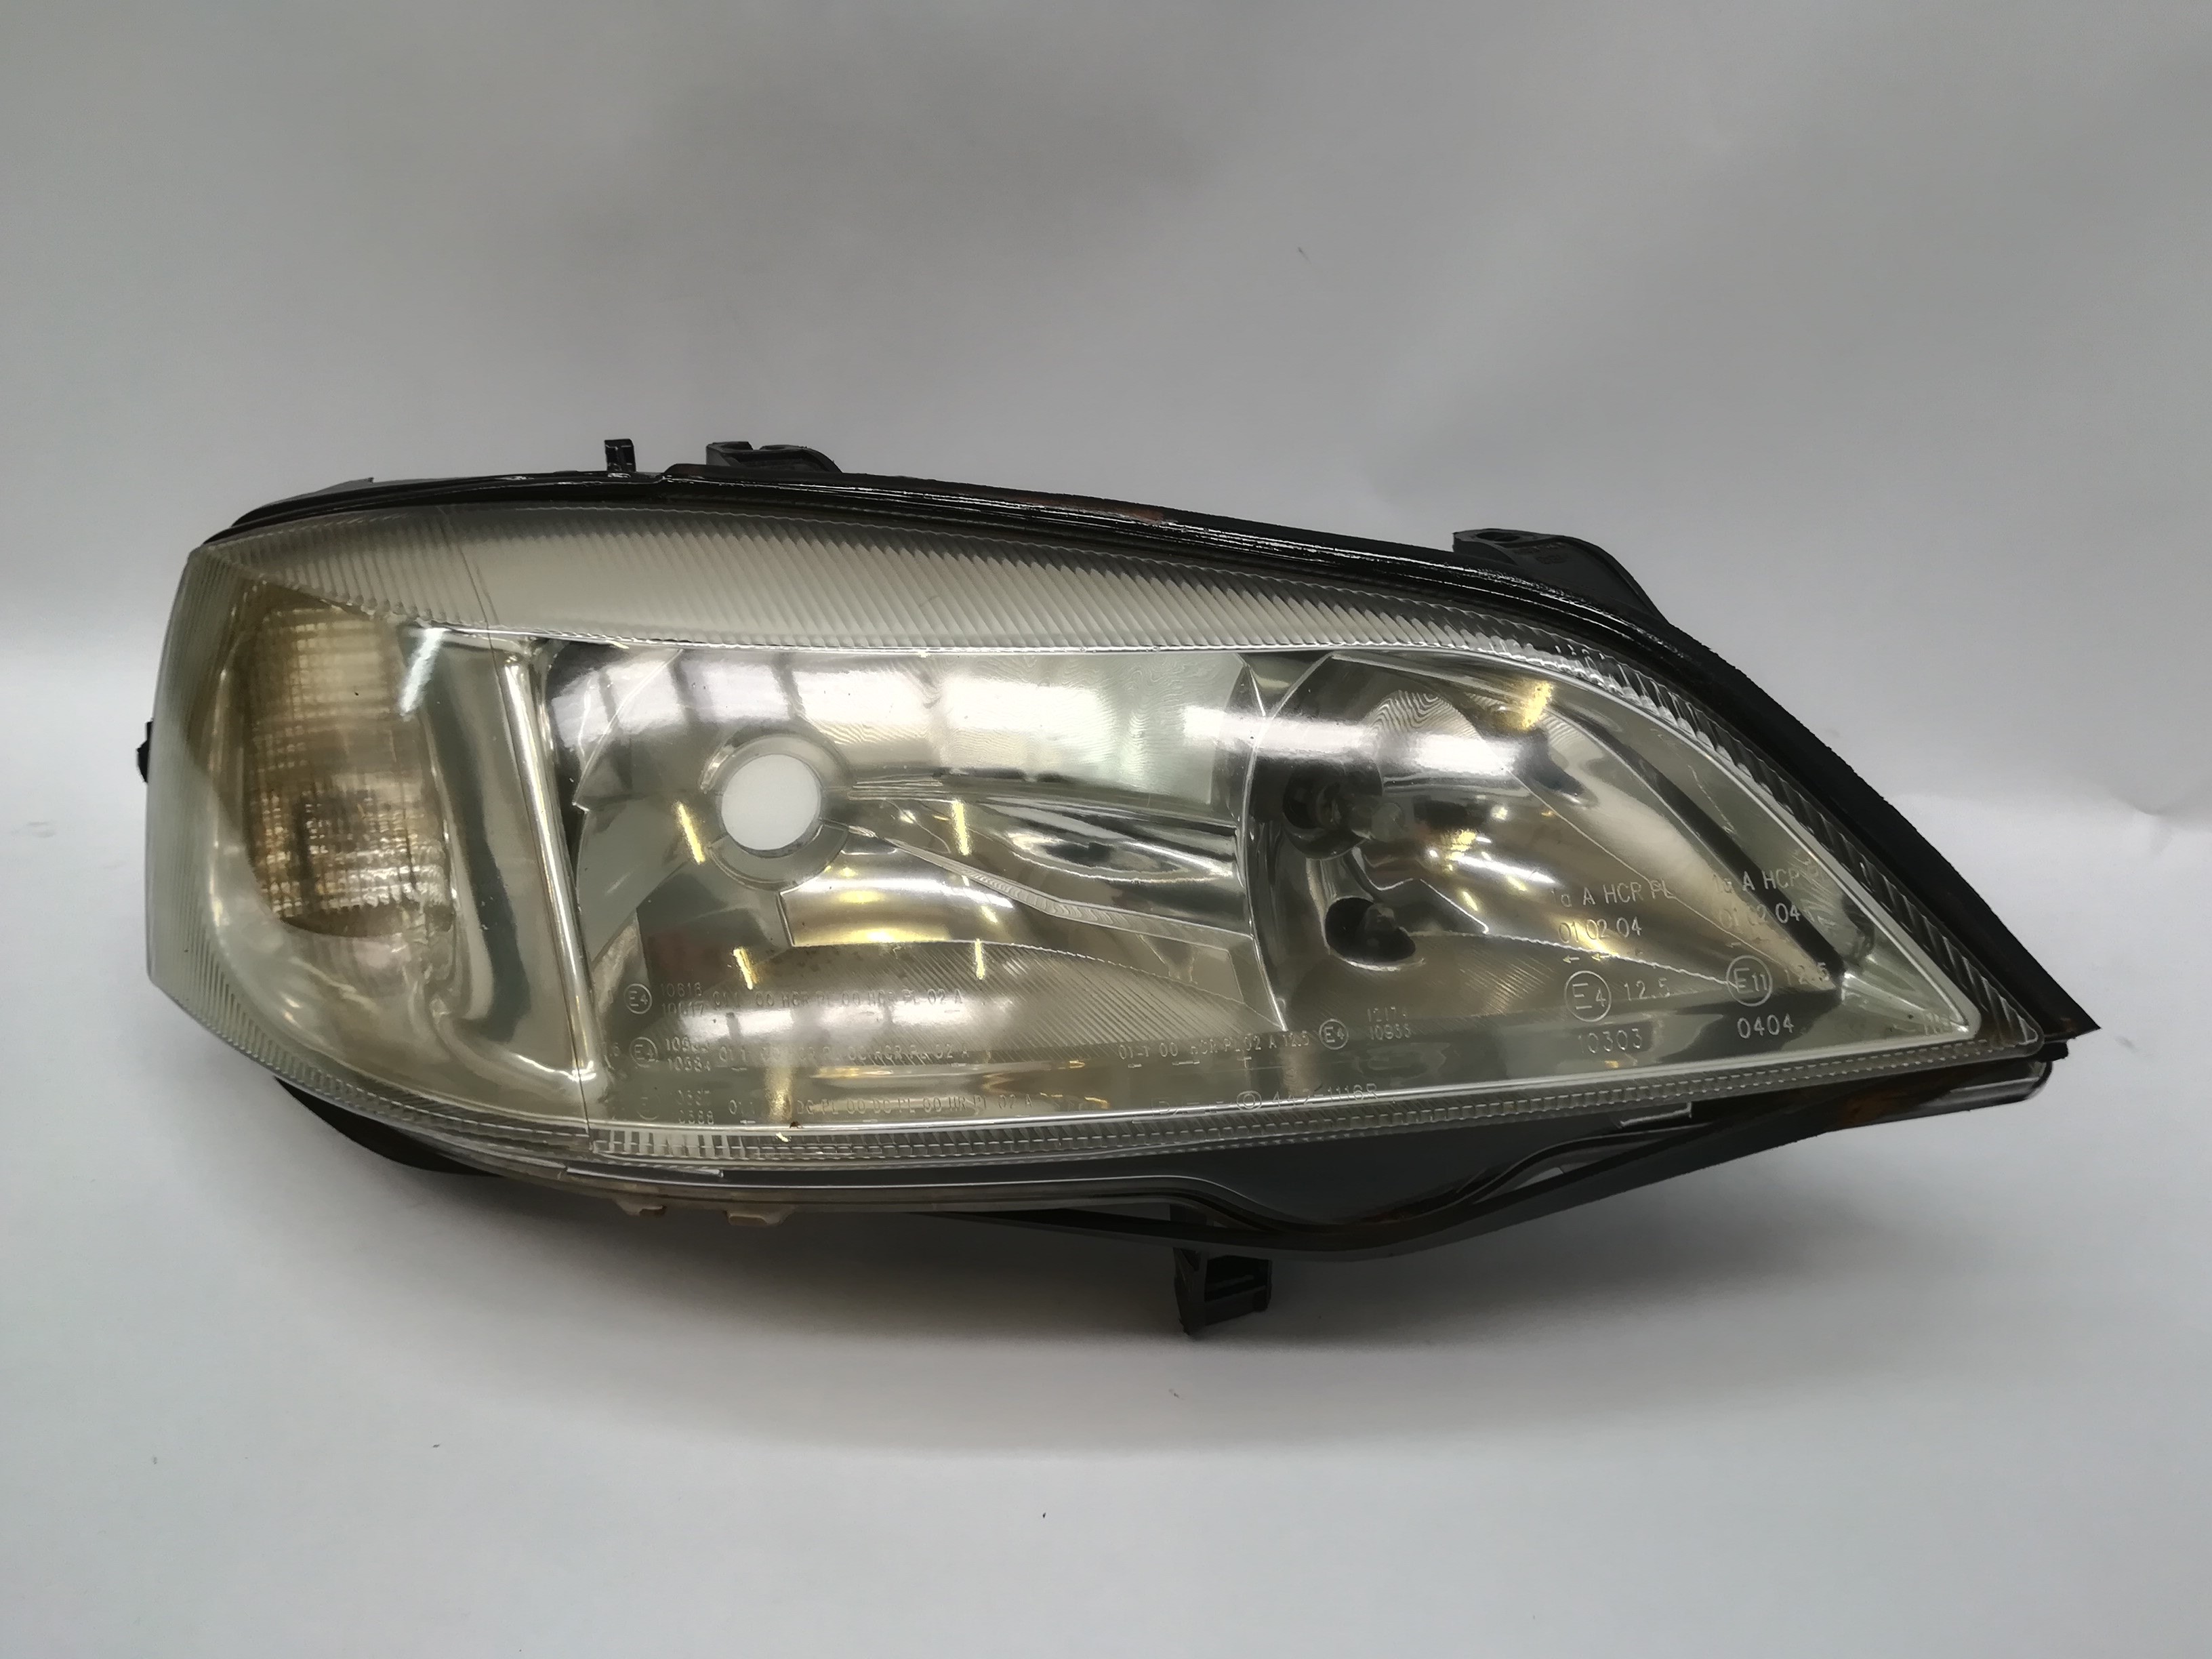 OPEL Astra H (2004-2014) Front Right Headlight 93175369 25169824